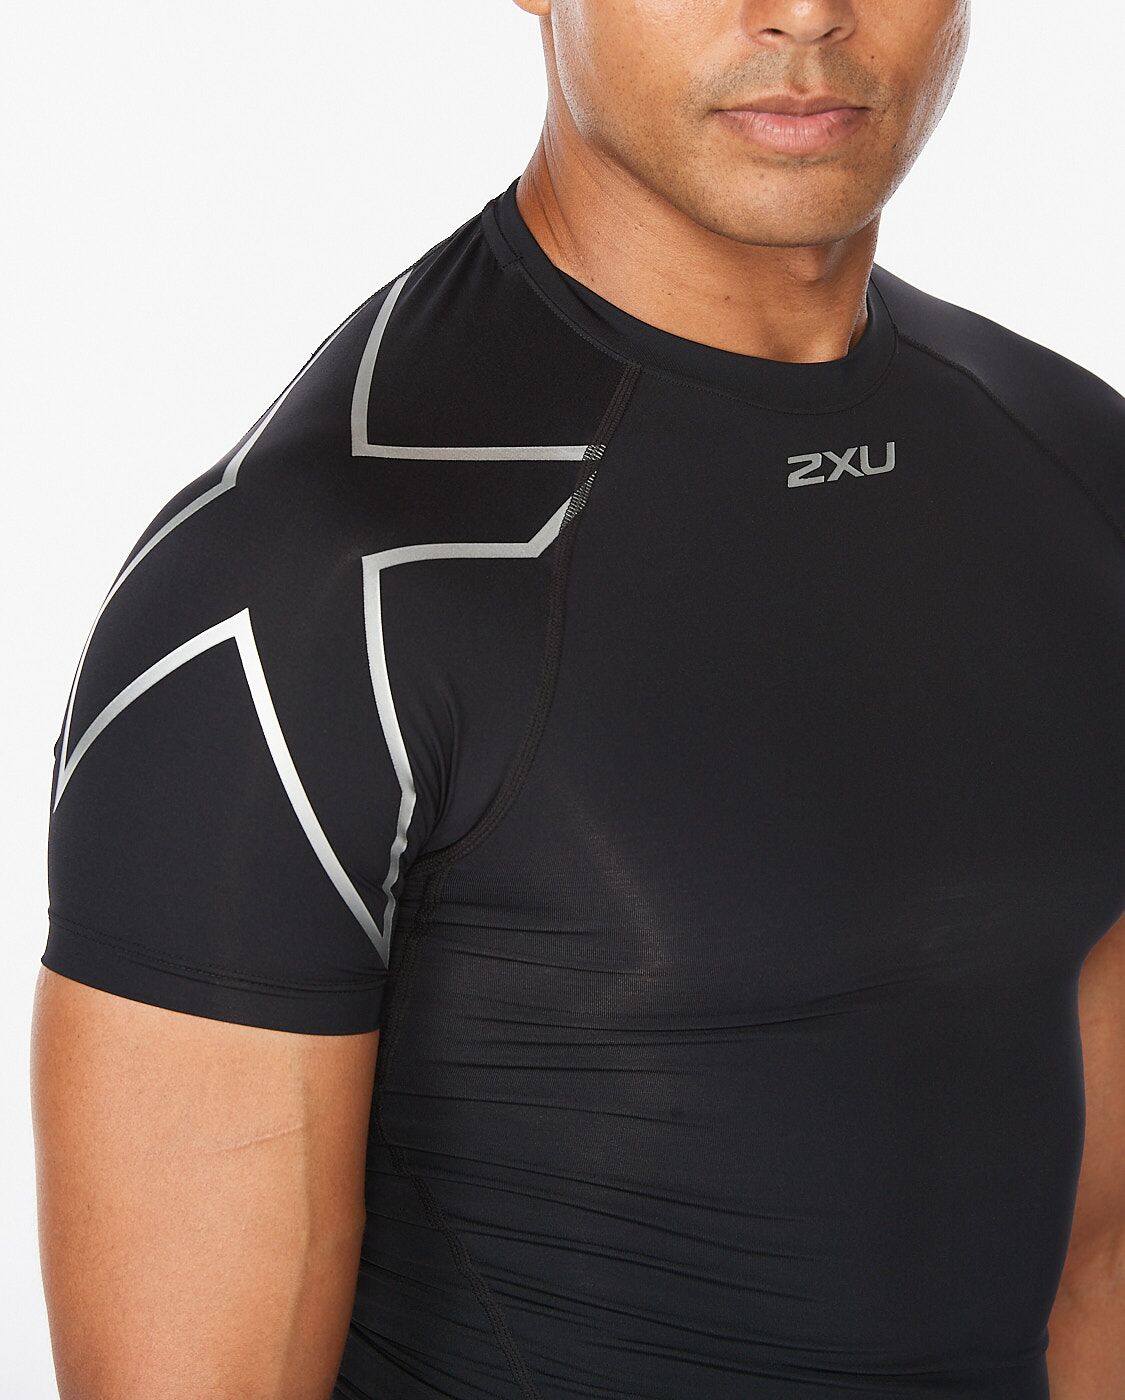 2XU South Africa - Men's Core Compression Short Sleeve - Black/Silver